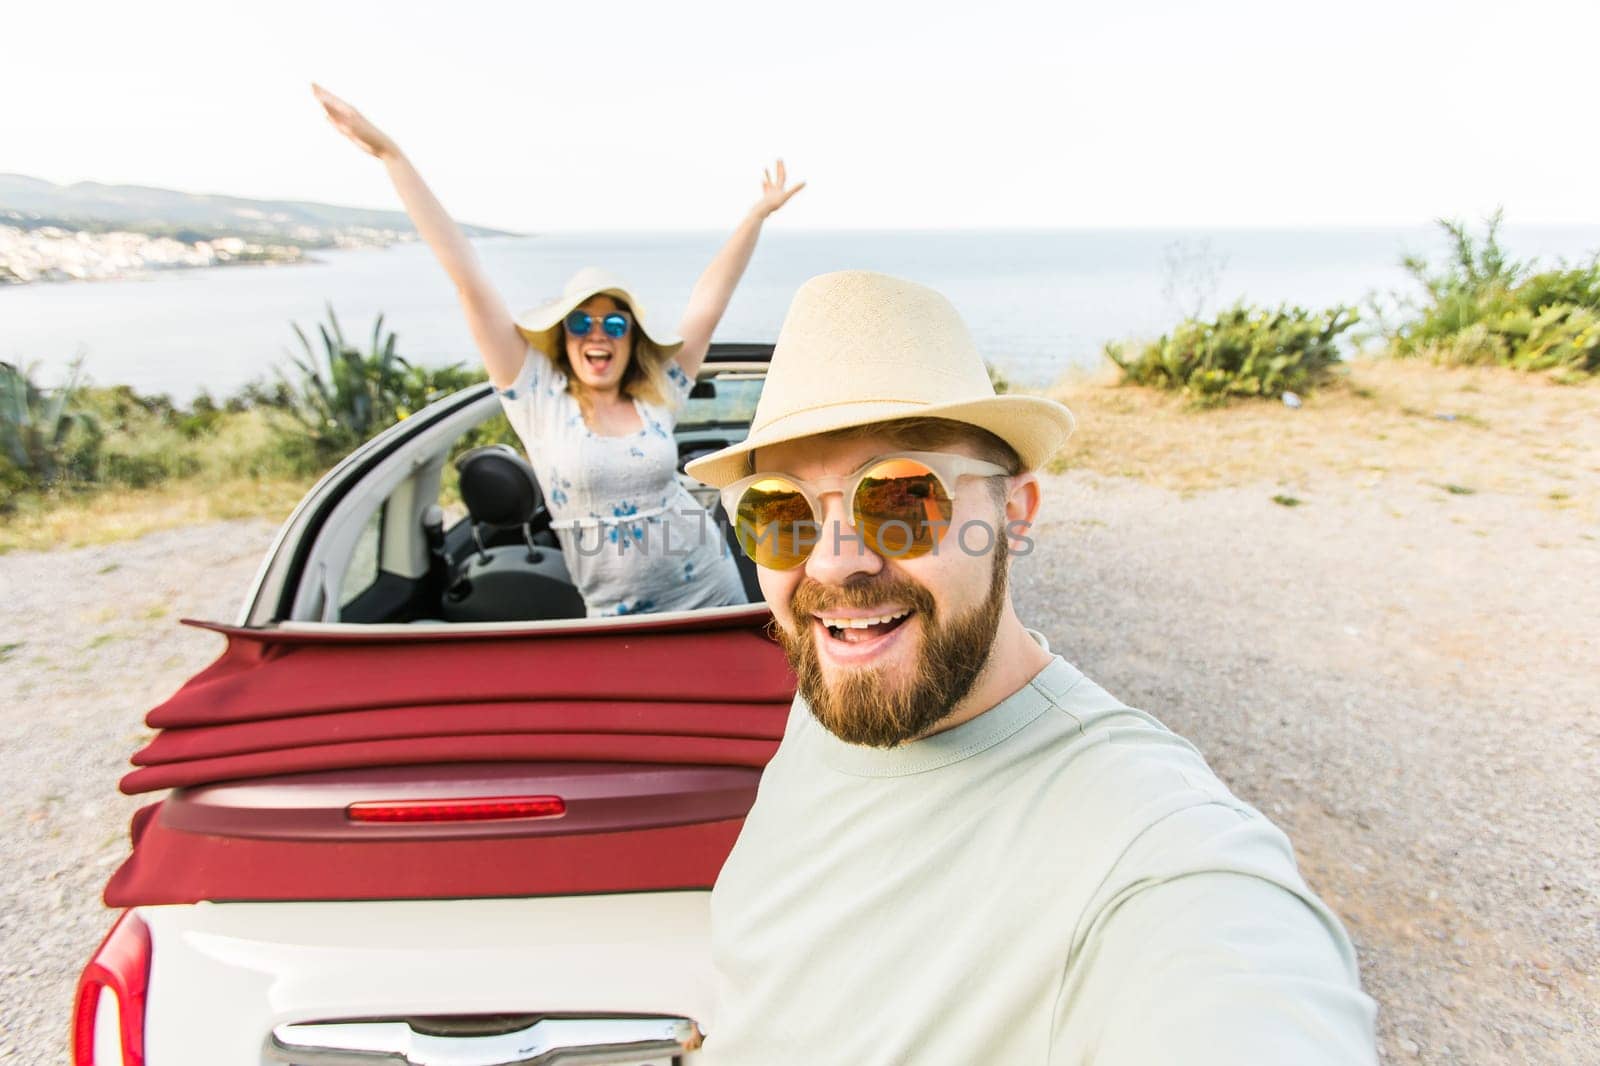 Happy beautiful couple in love taking a selfie portrait driving a convertible car on the road at vacation. Rental cars and vacation concept